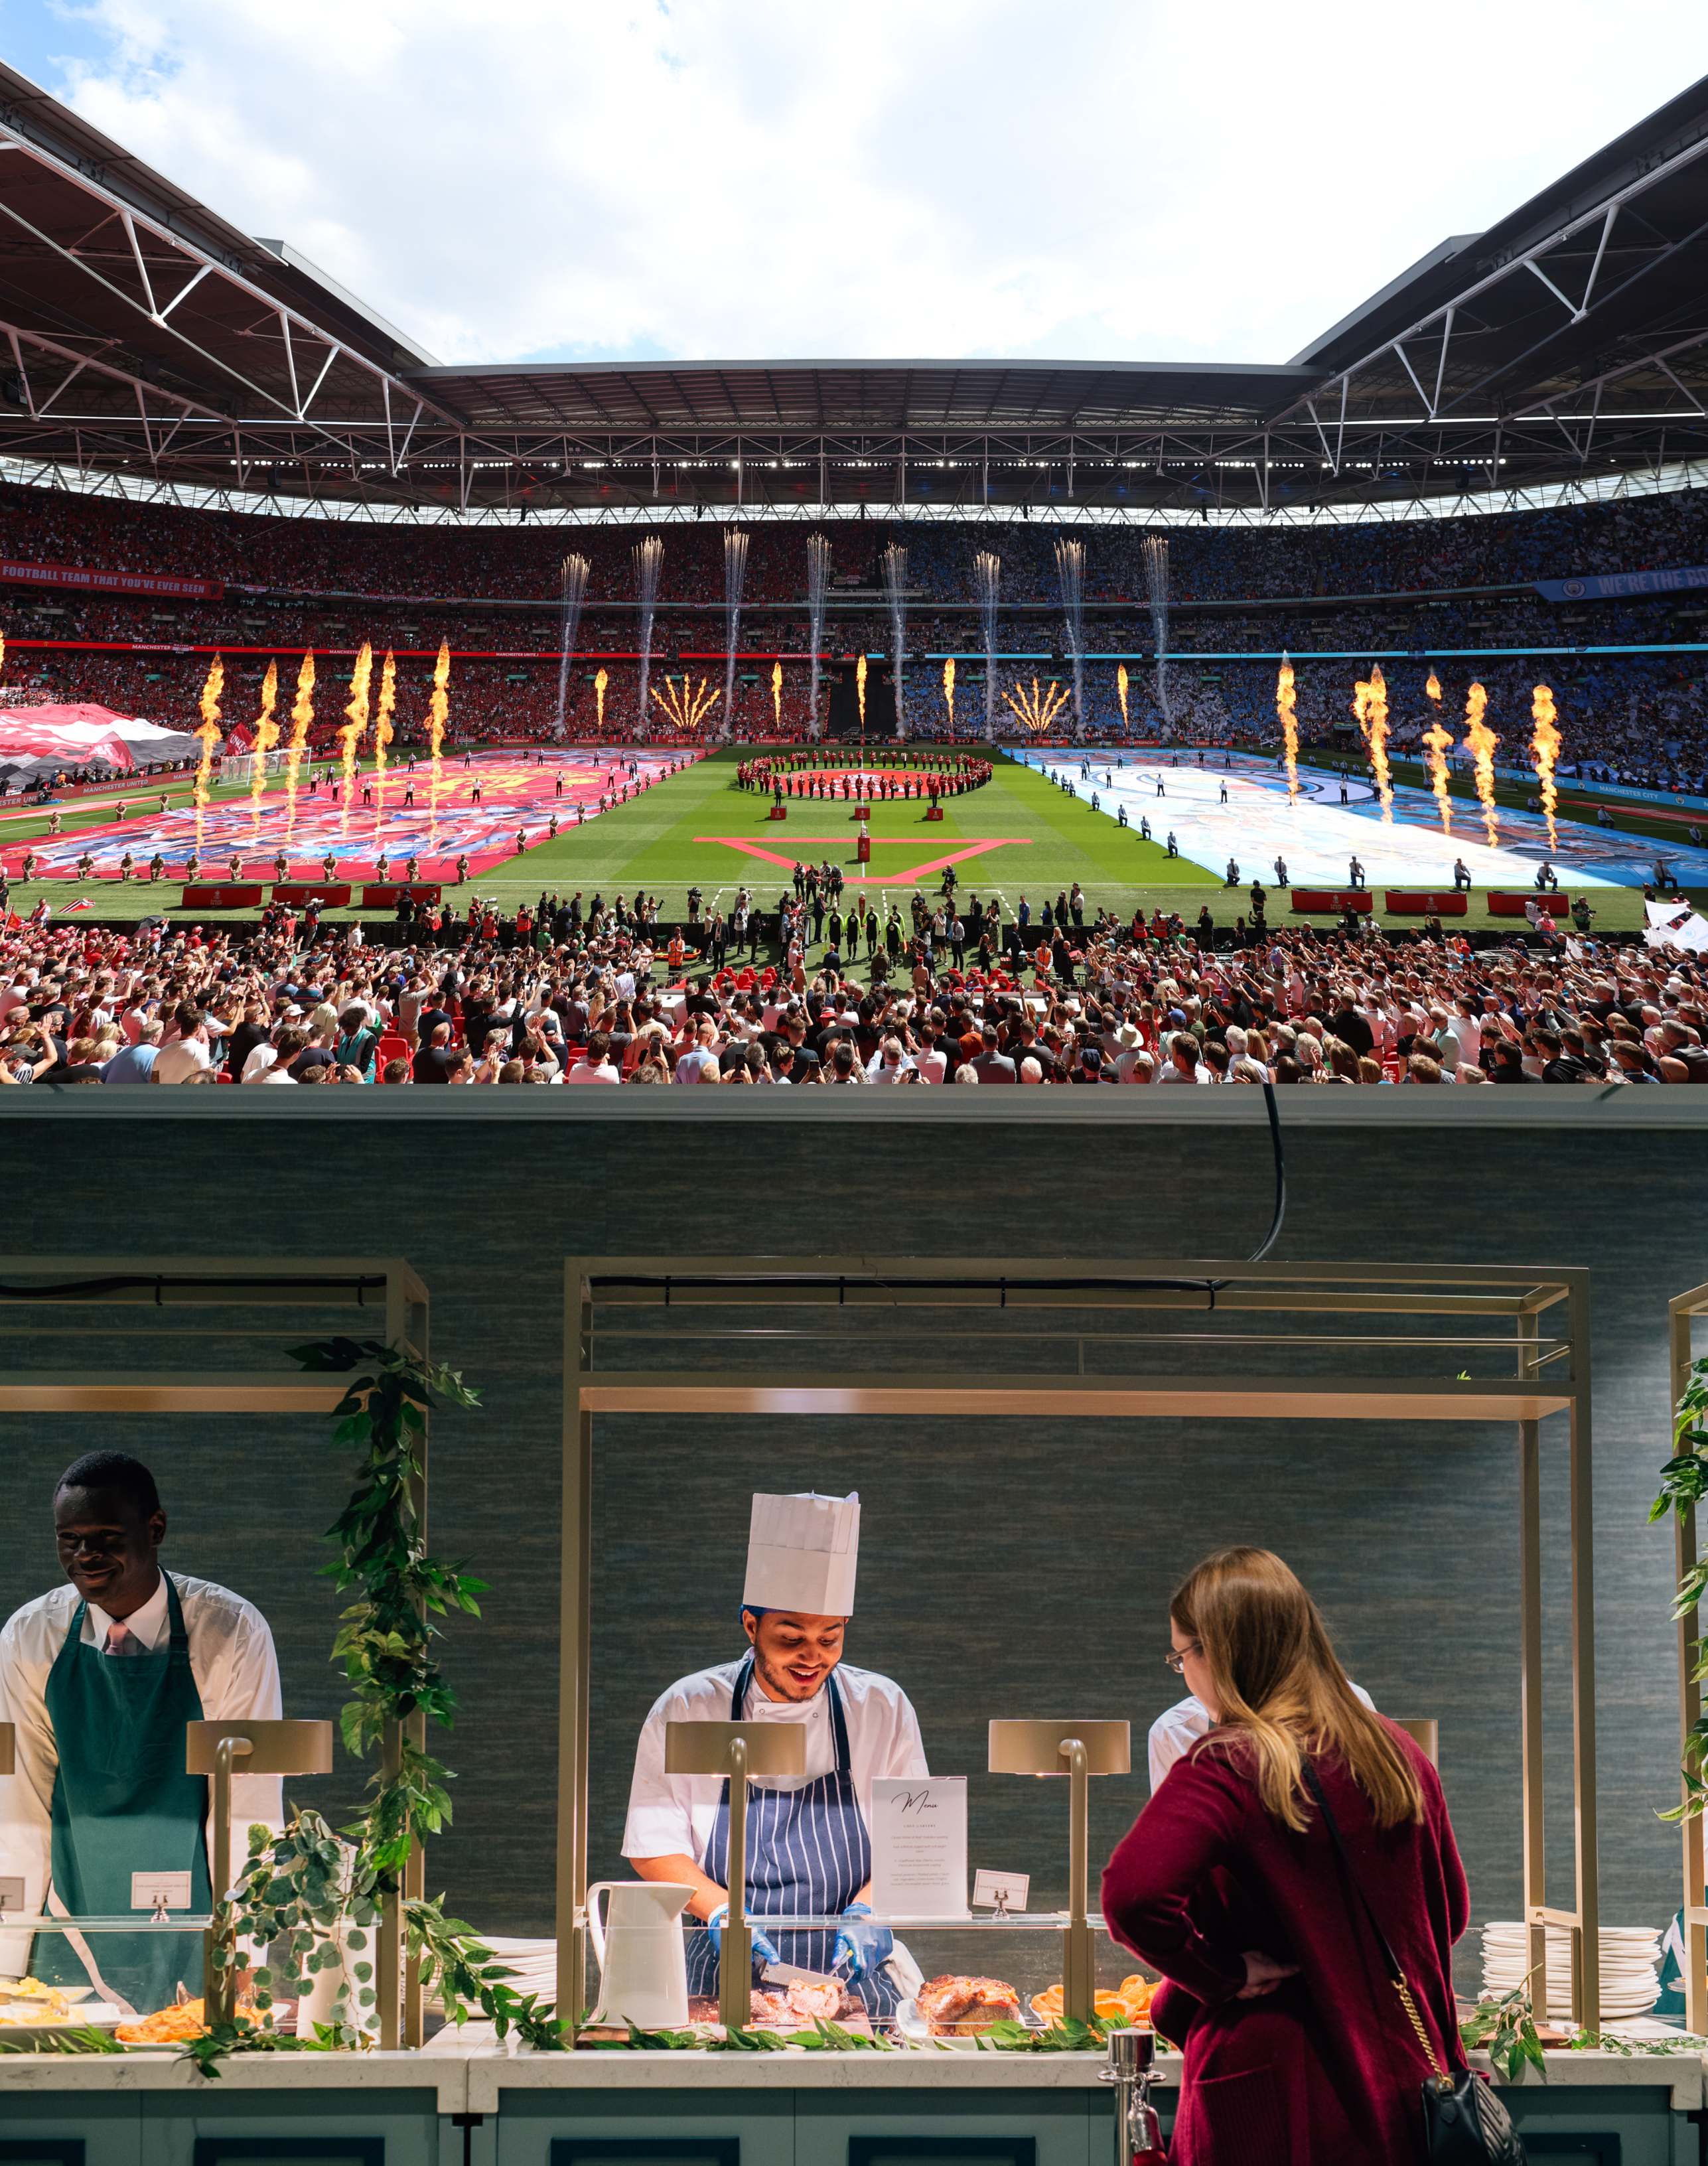 Whether you’re watching a gig or a game, Club Wembley has your food and drink covered